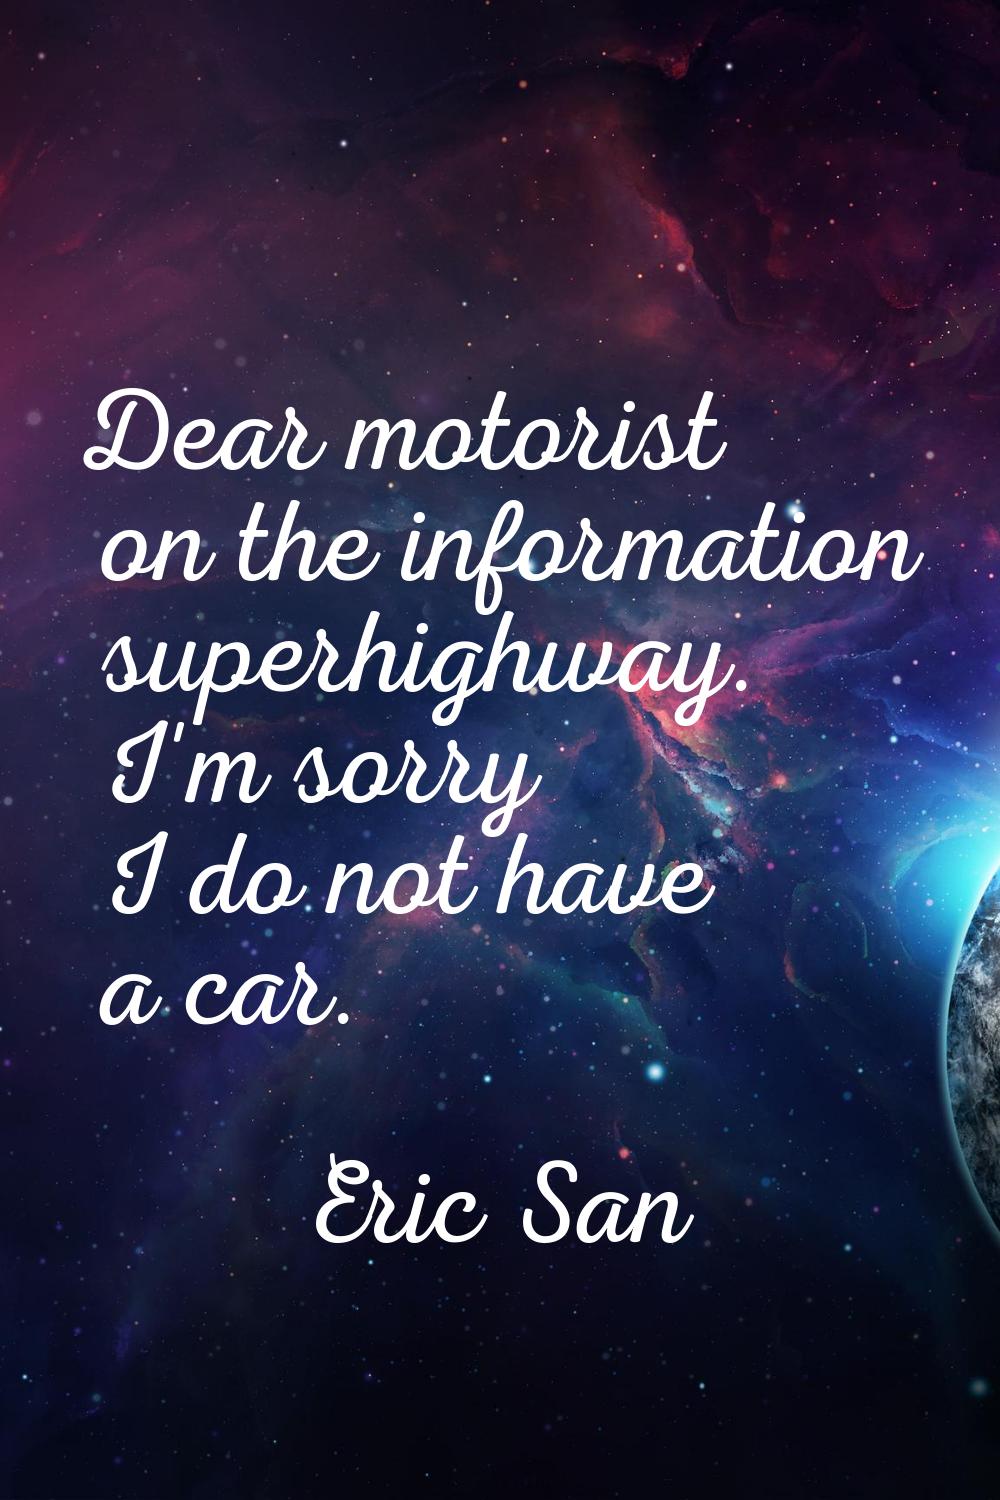 Dear motorist on the information superhighway. I'm sorry I do not have a car.